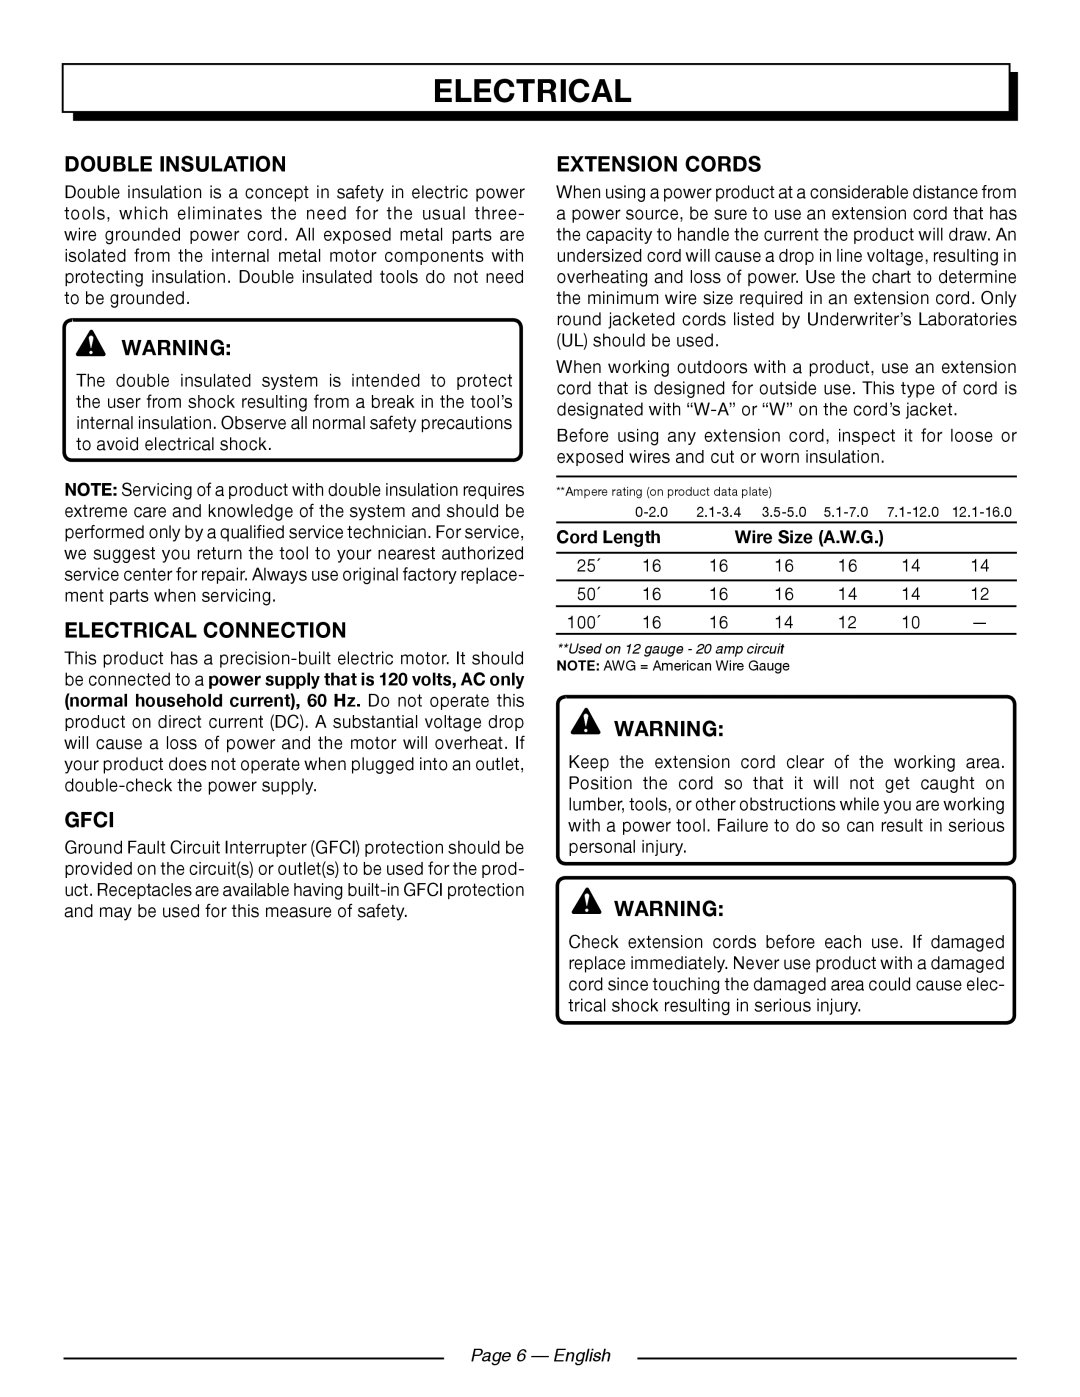 Homelite UT41121 Double Insulation, Electrical Connection, Gfci, Extension Cords, Cord Length, Page 6 - English 